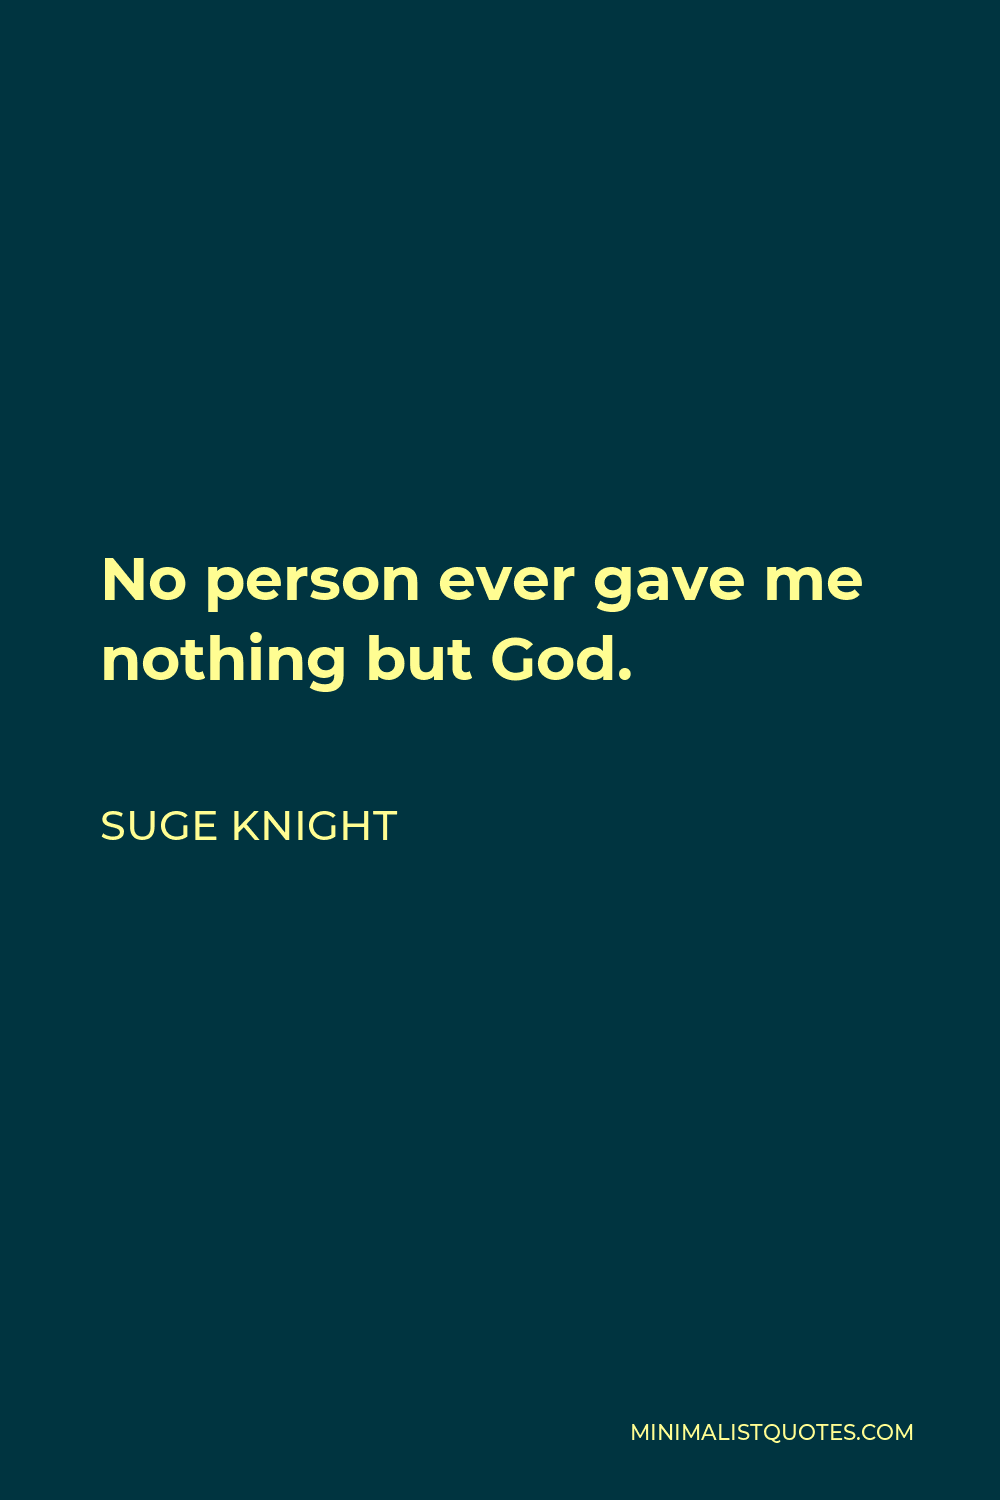 Suge Knight Quote - No person ever gave me nothing but God.